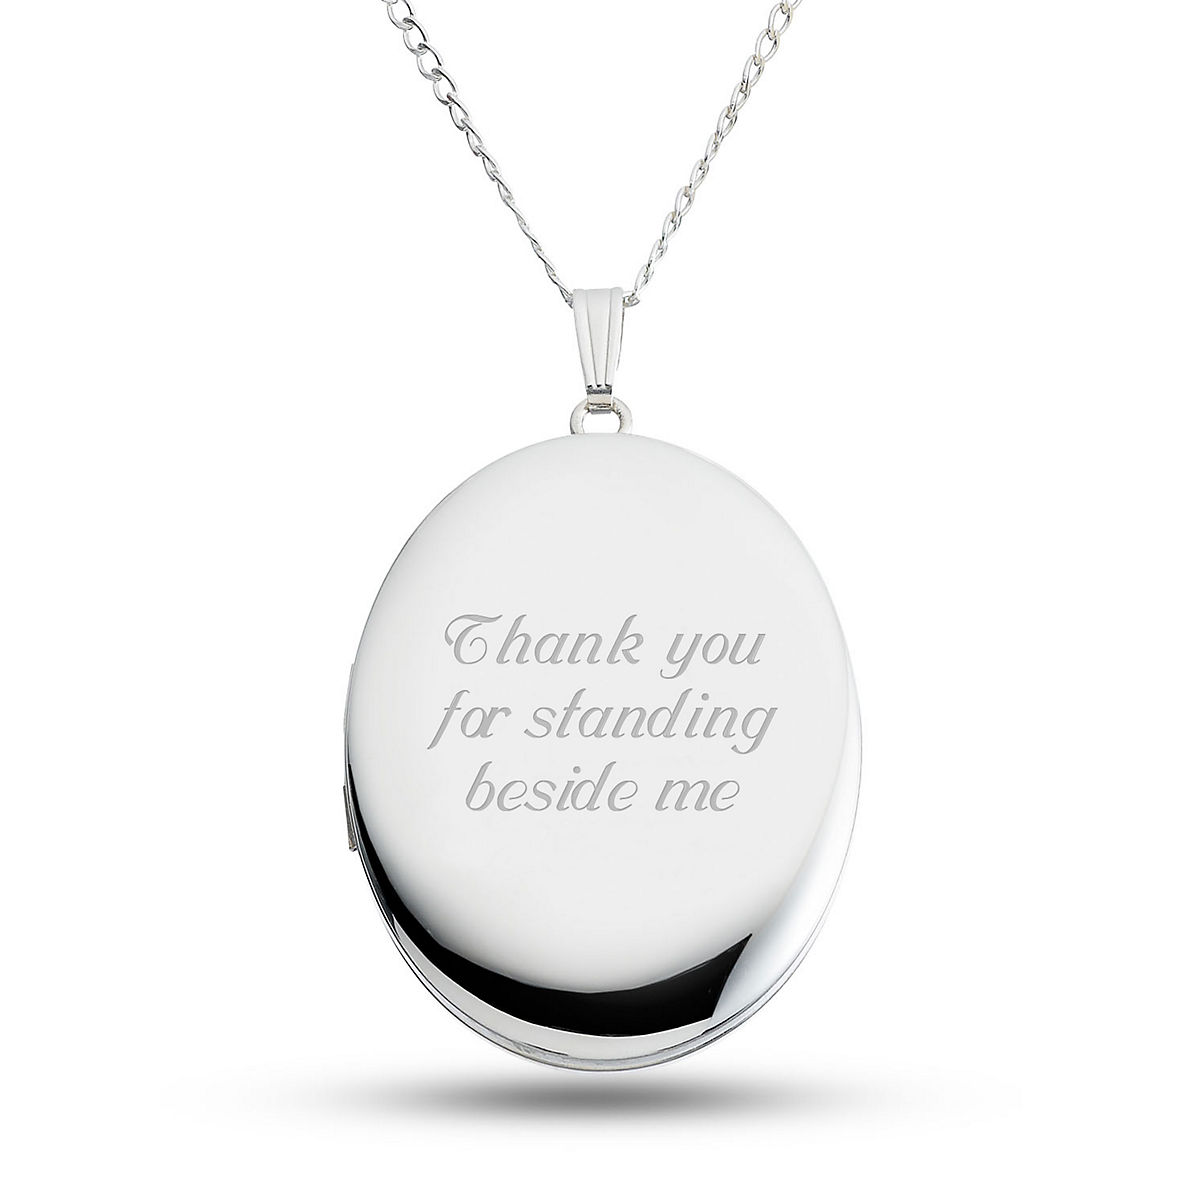 SL1003 925 Sterling Silver Large Size 34mm X 28mm Edge Engraved Oval Locket 